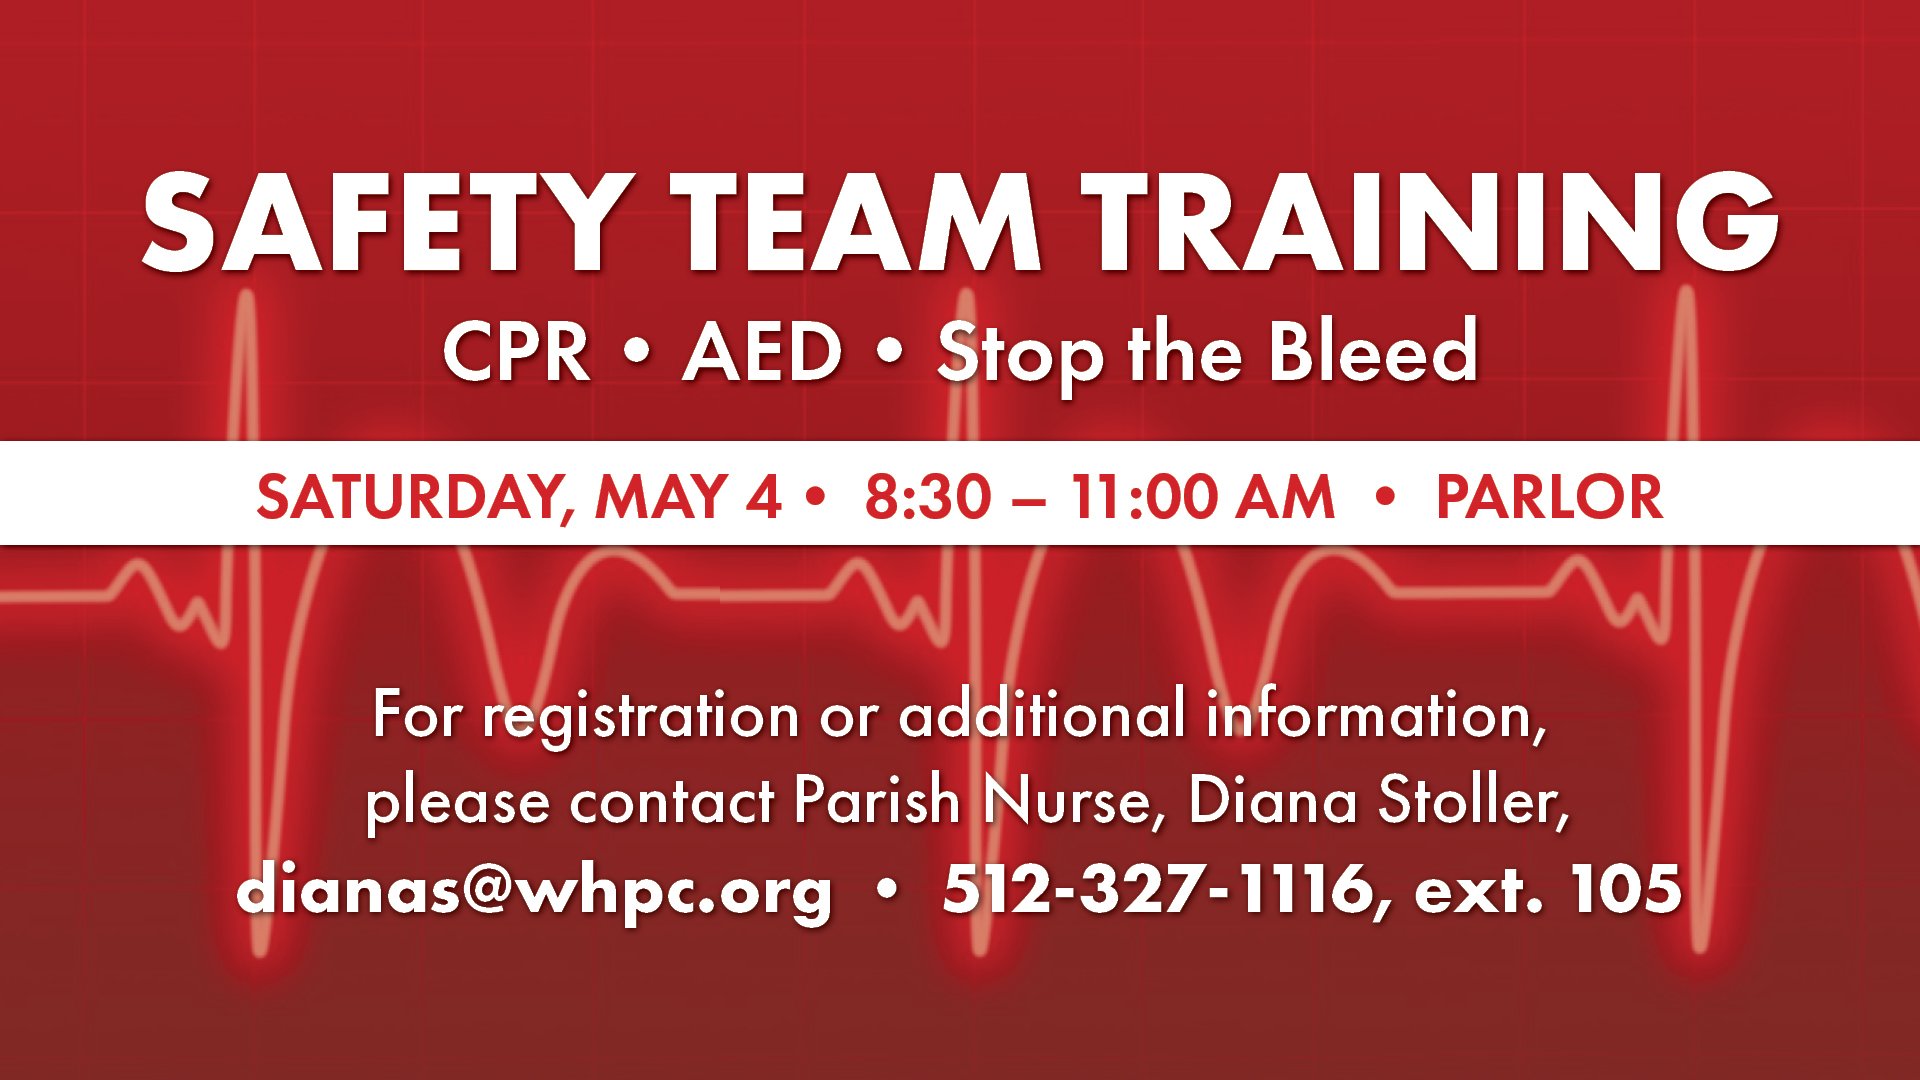 Safety Team Training Tomorrow! Learn CPR, AED, Stop the Bleed
Saturday, May 4 | 8:30 &ndash; 11:00 am | Parlor
...
For registration or additional information, please contact Parish Nurse, Diana Stoller &bull; 512-327-1116, ext. 105